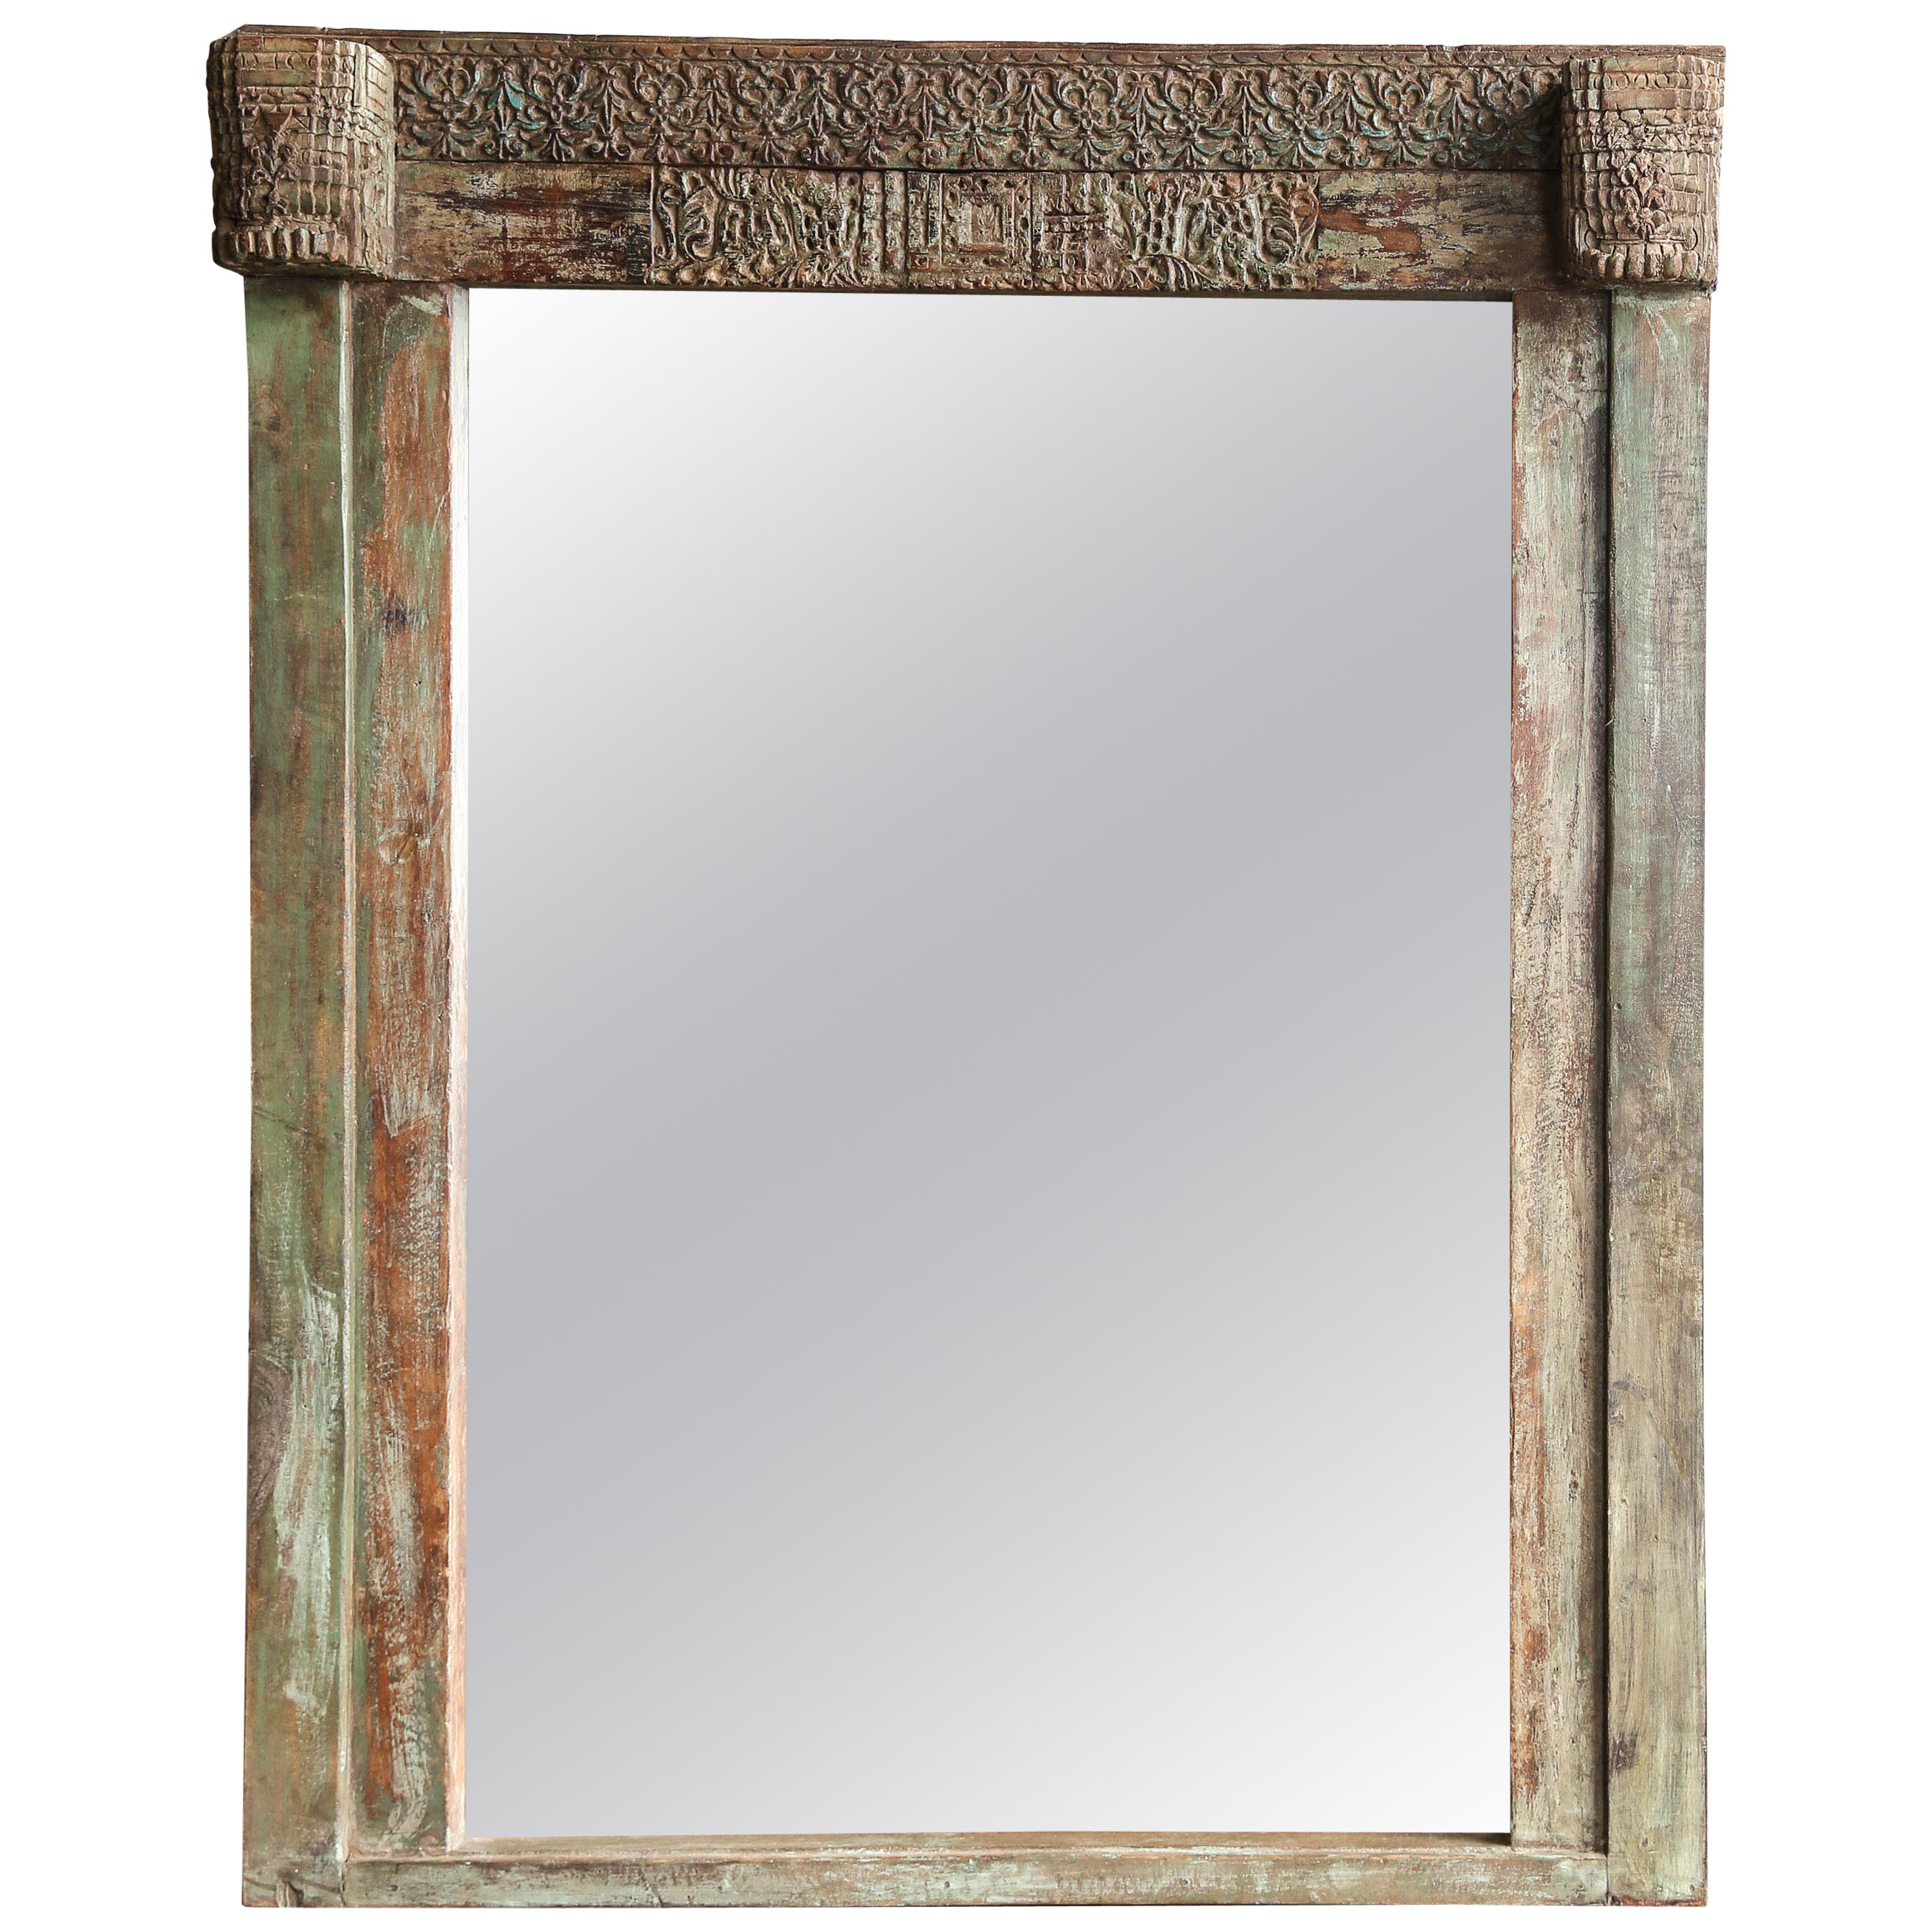 Classic Mirror Made Out of Early 19th Century Carved Teak Wood Window Frame For Sale